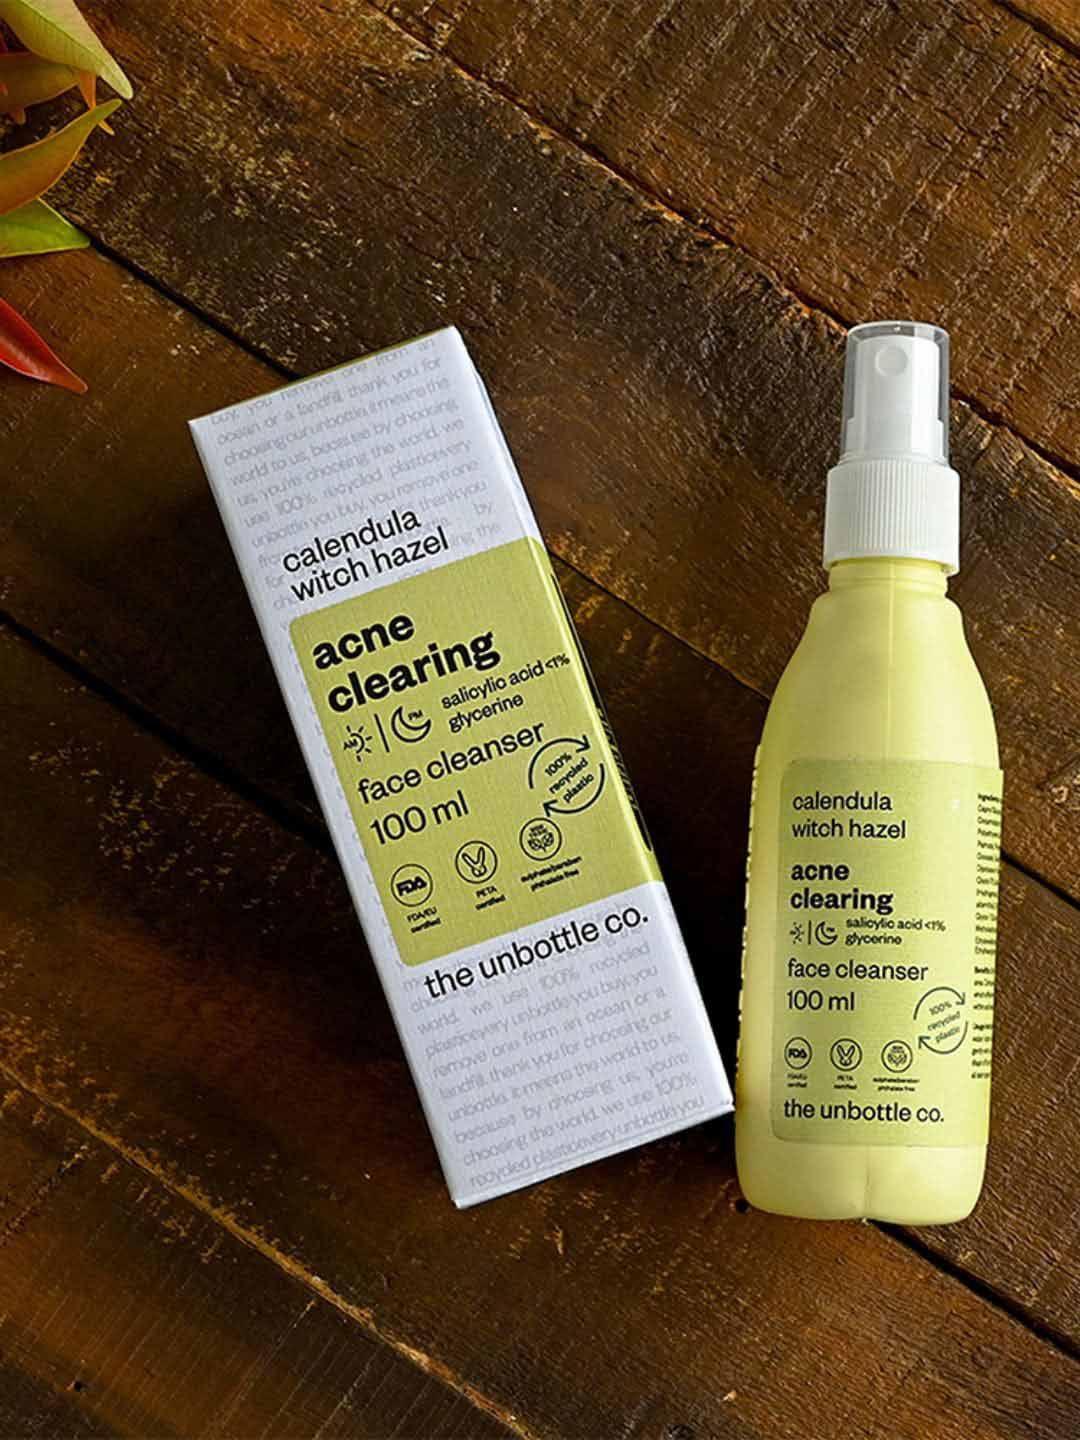 the unbottle co acne clearing face cleanser proven to fight acne & dark spots 100 ml